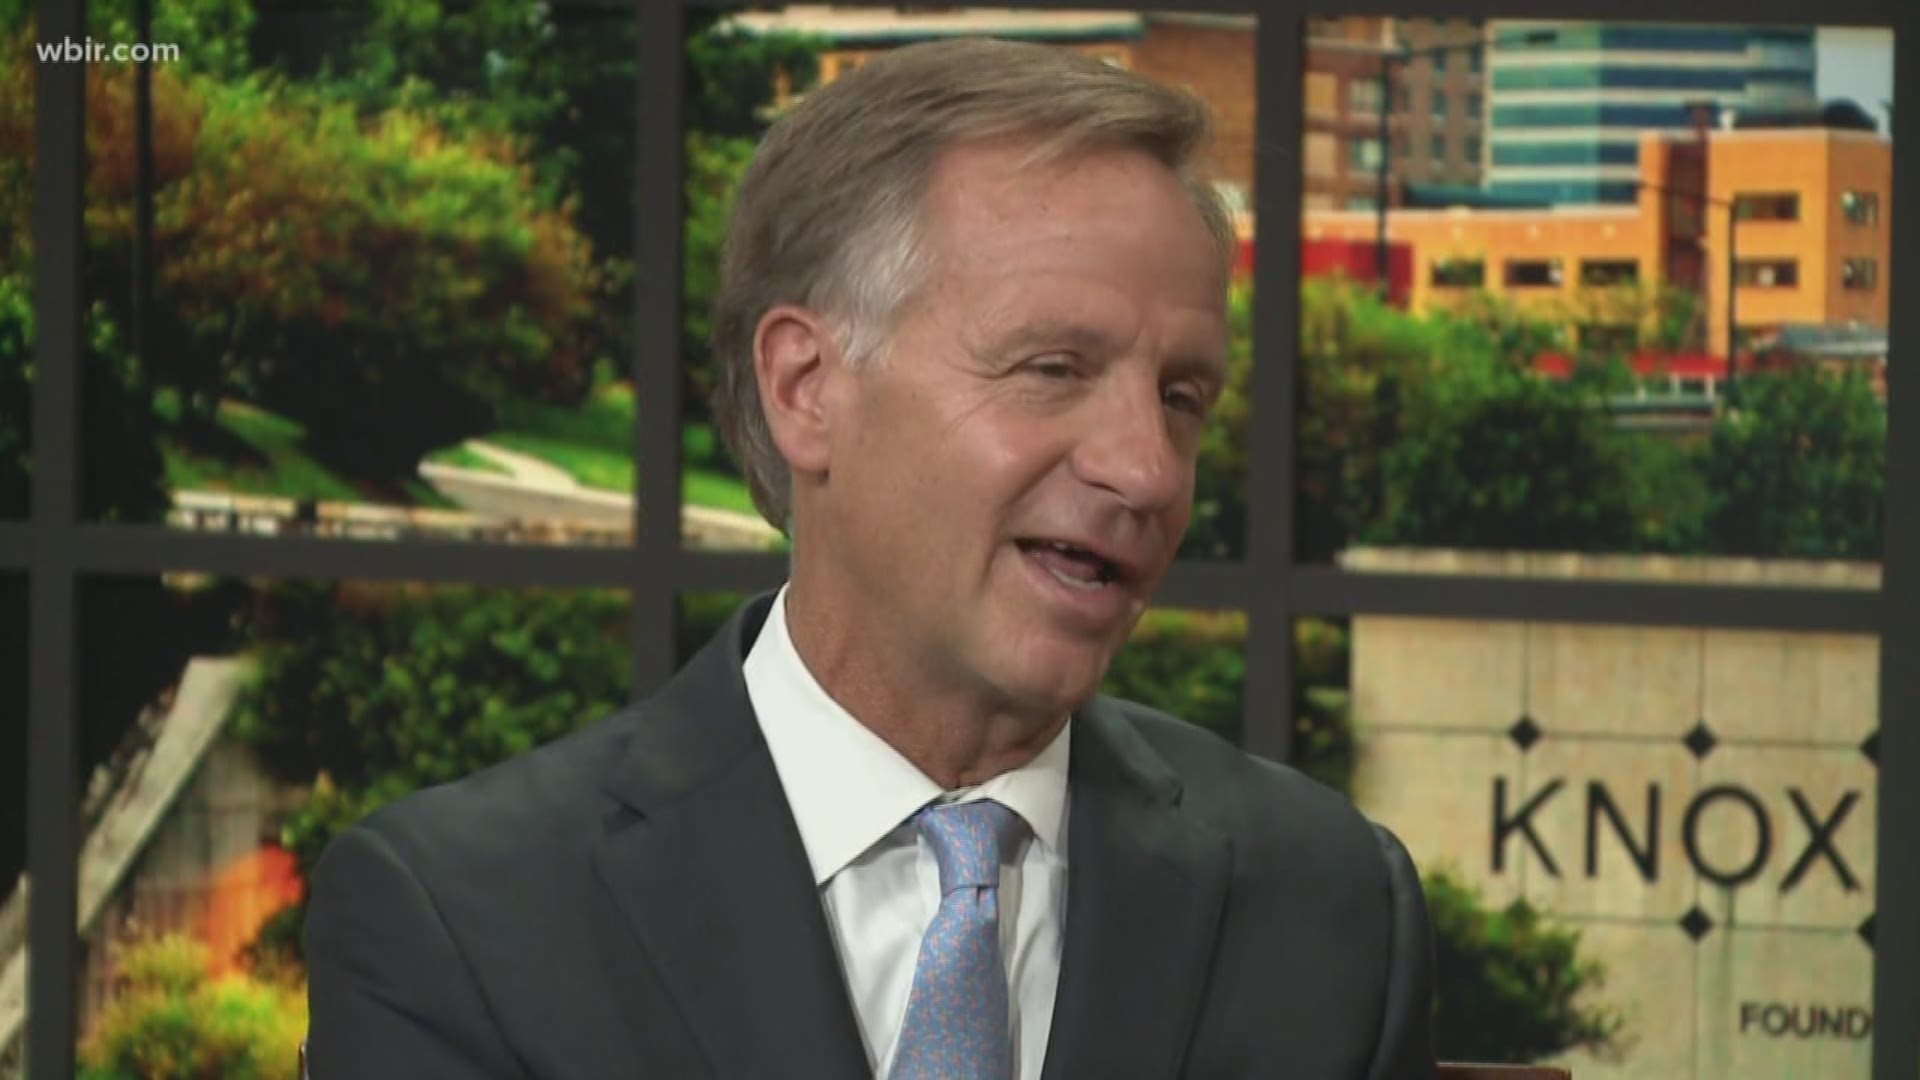 Former Governor Bill Haslam says he only told a few family members and close friends before announcing his decision last week not to run for the U.S. senate.